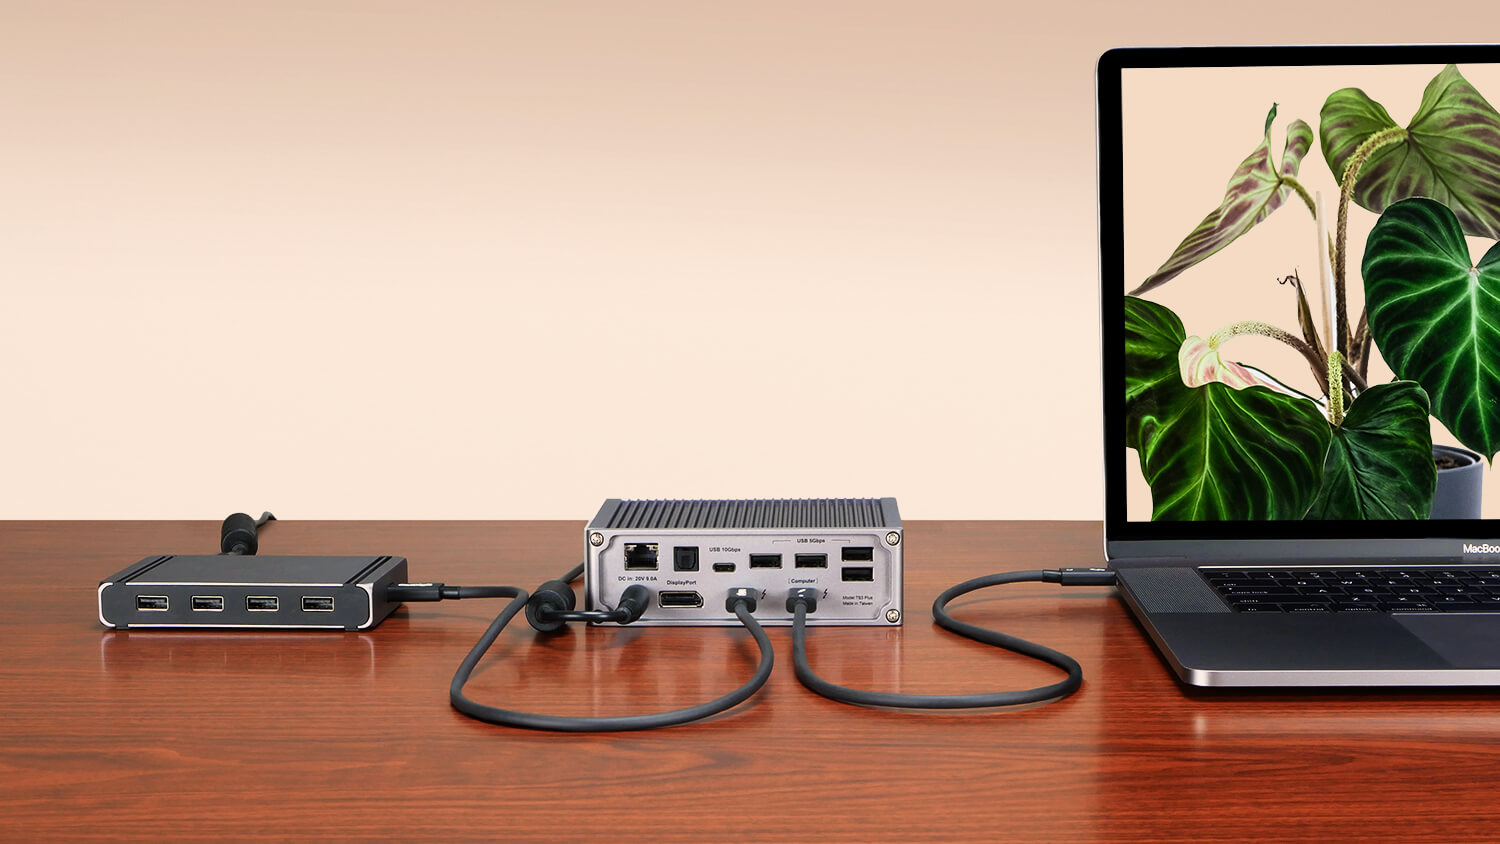 CalDigit Thunderbolt 4 review: the ultimate dock for your laptop